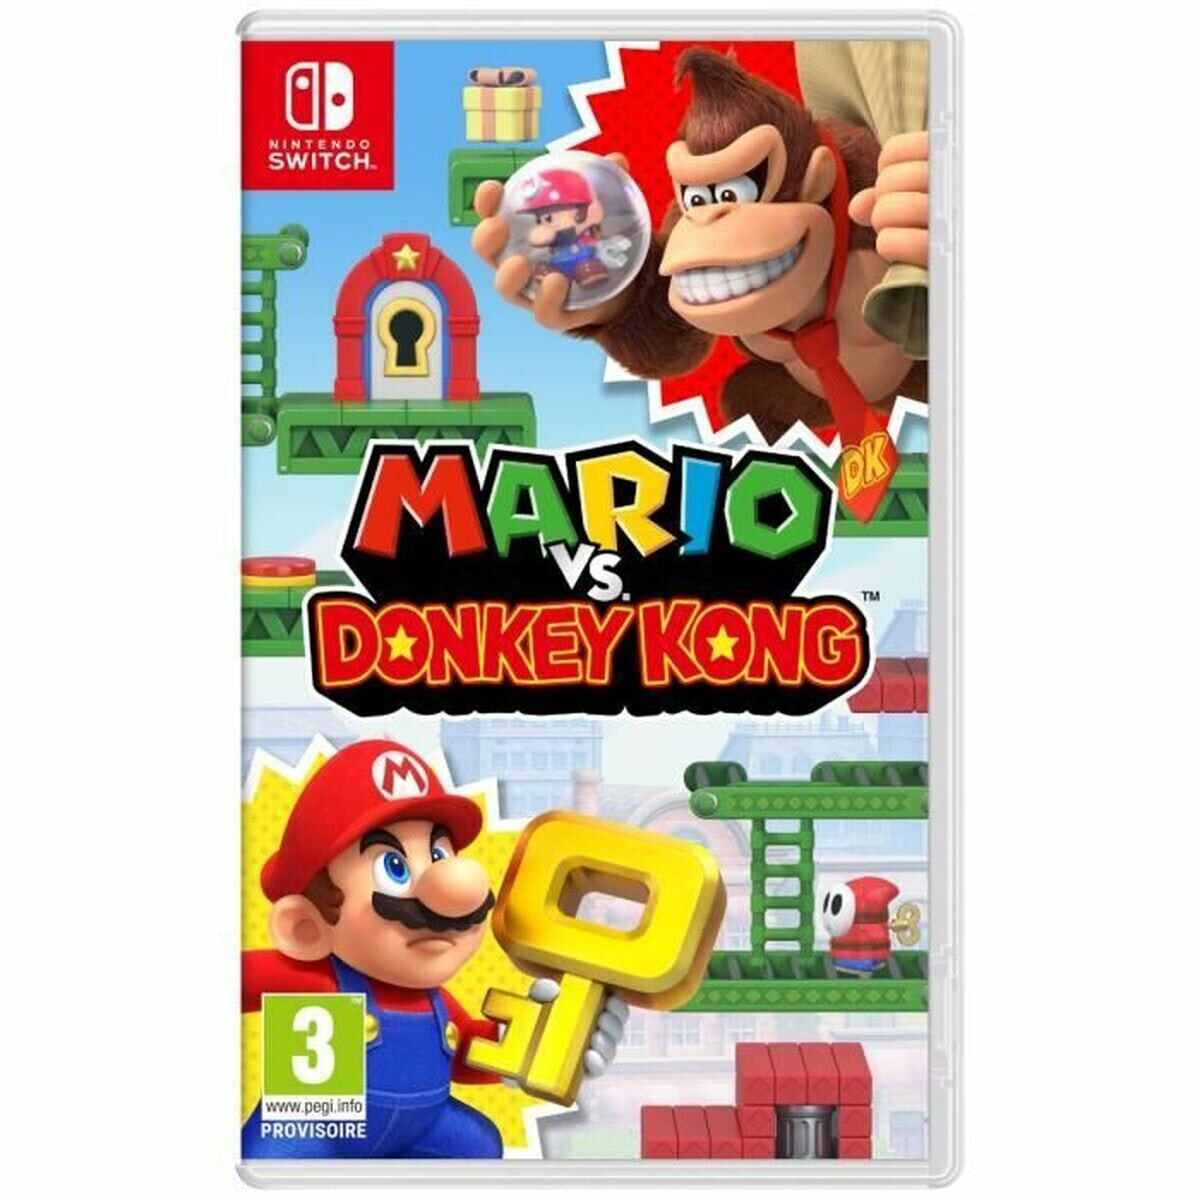 Video game for Switch Nintendo Mario vs. Donkey Kong (FR)